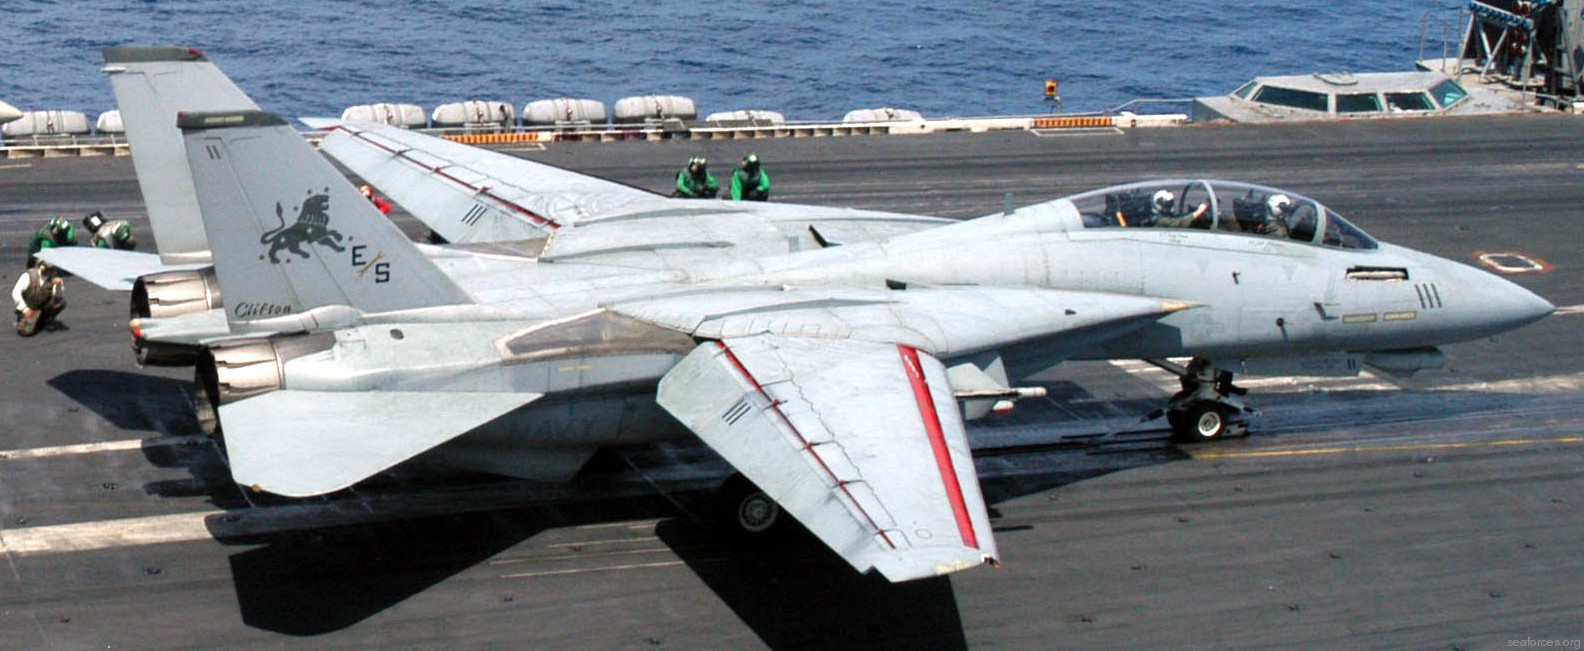 vf-213 black lions fighter squadron us navy f-14d tomcat carrier air wing cvw-8 uss theodore roosevelt cvn-71 46